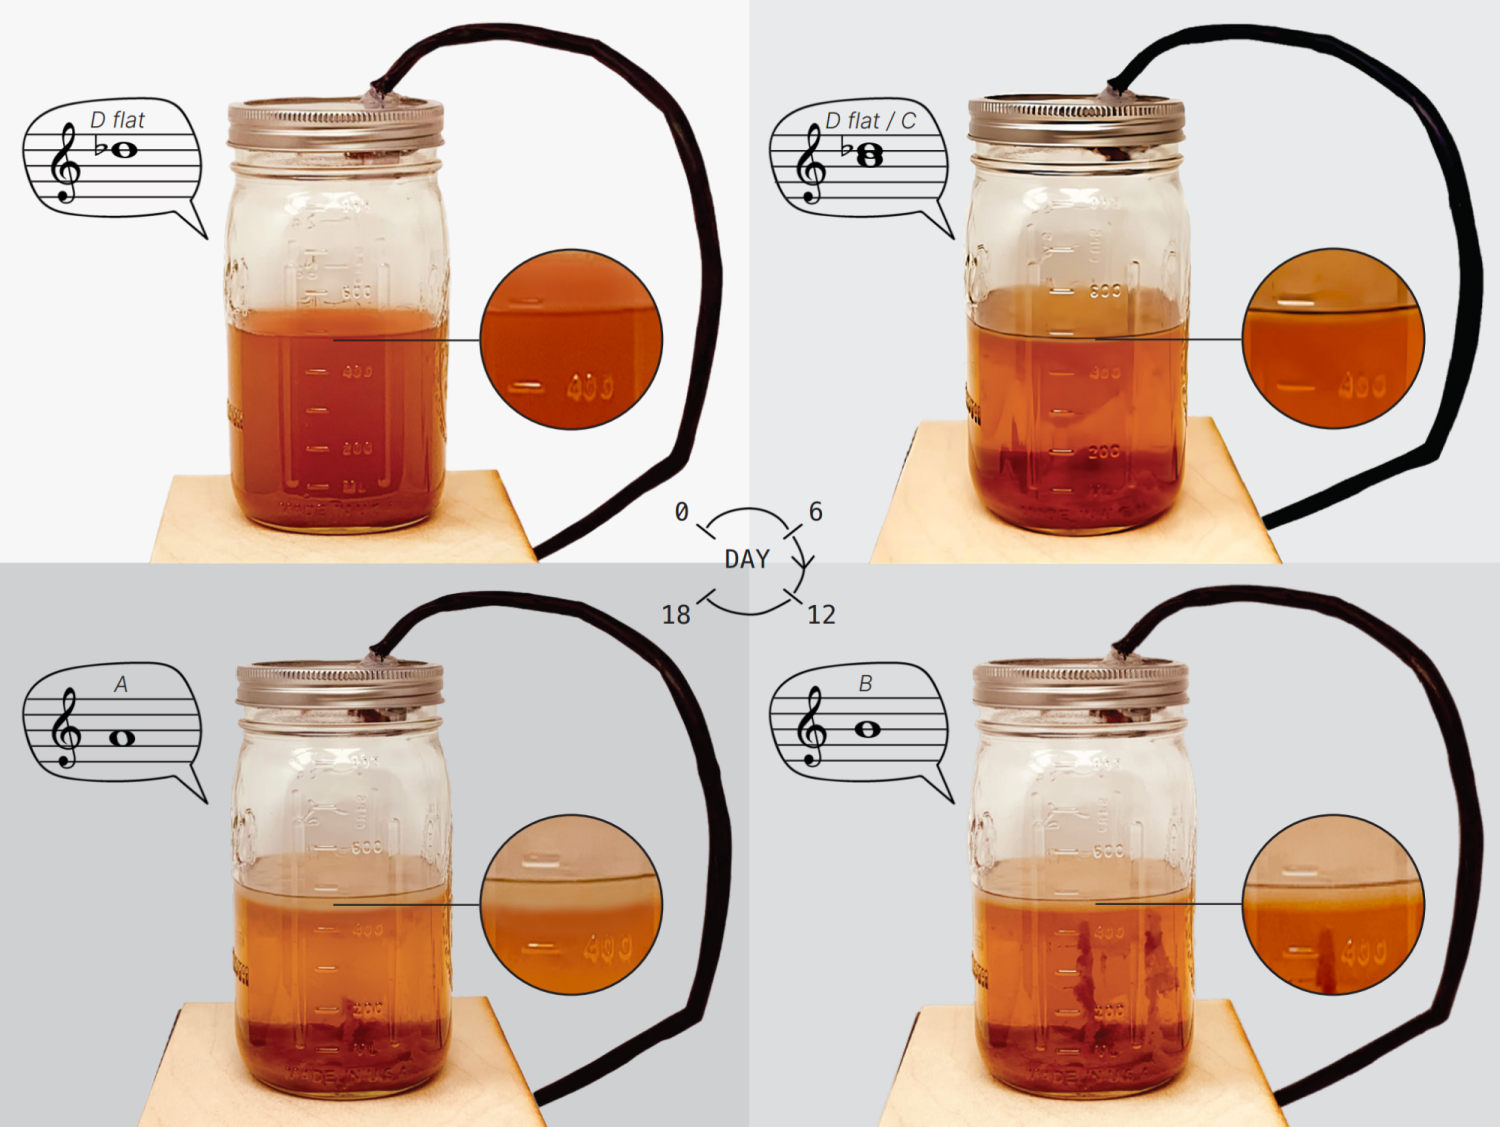 Photo series of SCOBY growth with corresponding musical notes